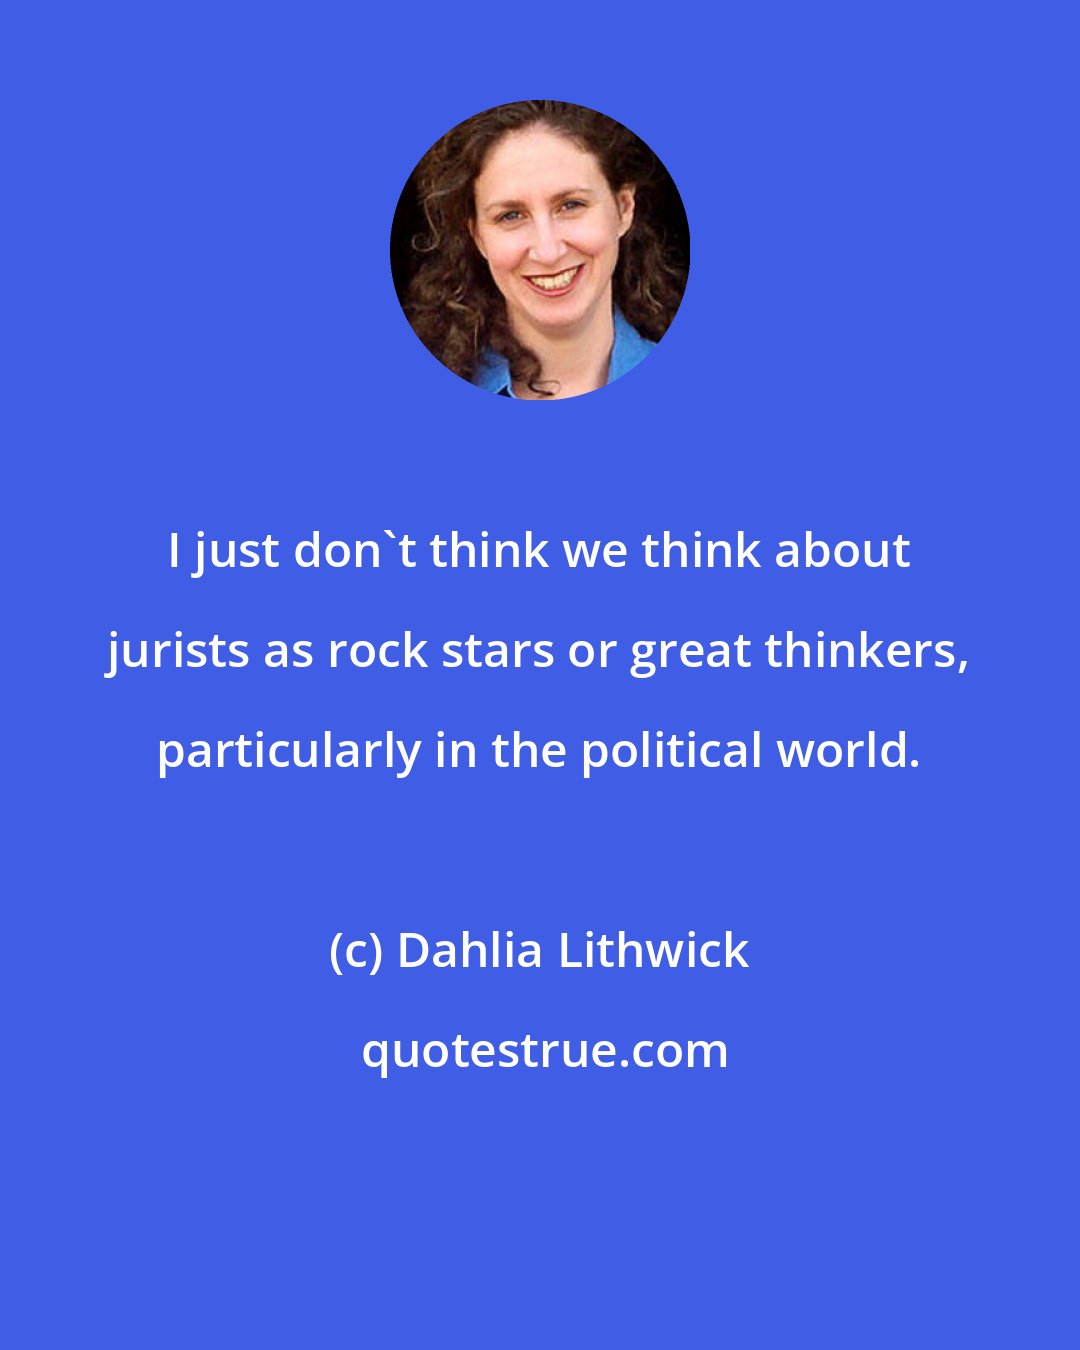 Dahlia Lithwick: I just don't think we think about jurists as rock stars or great thinkers, particularly in the political world.